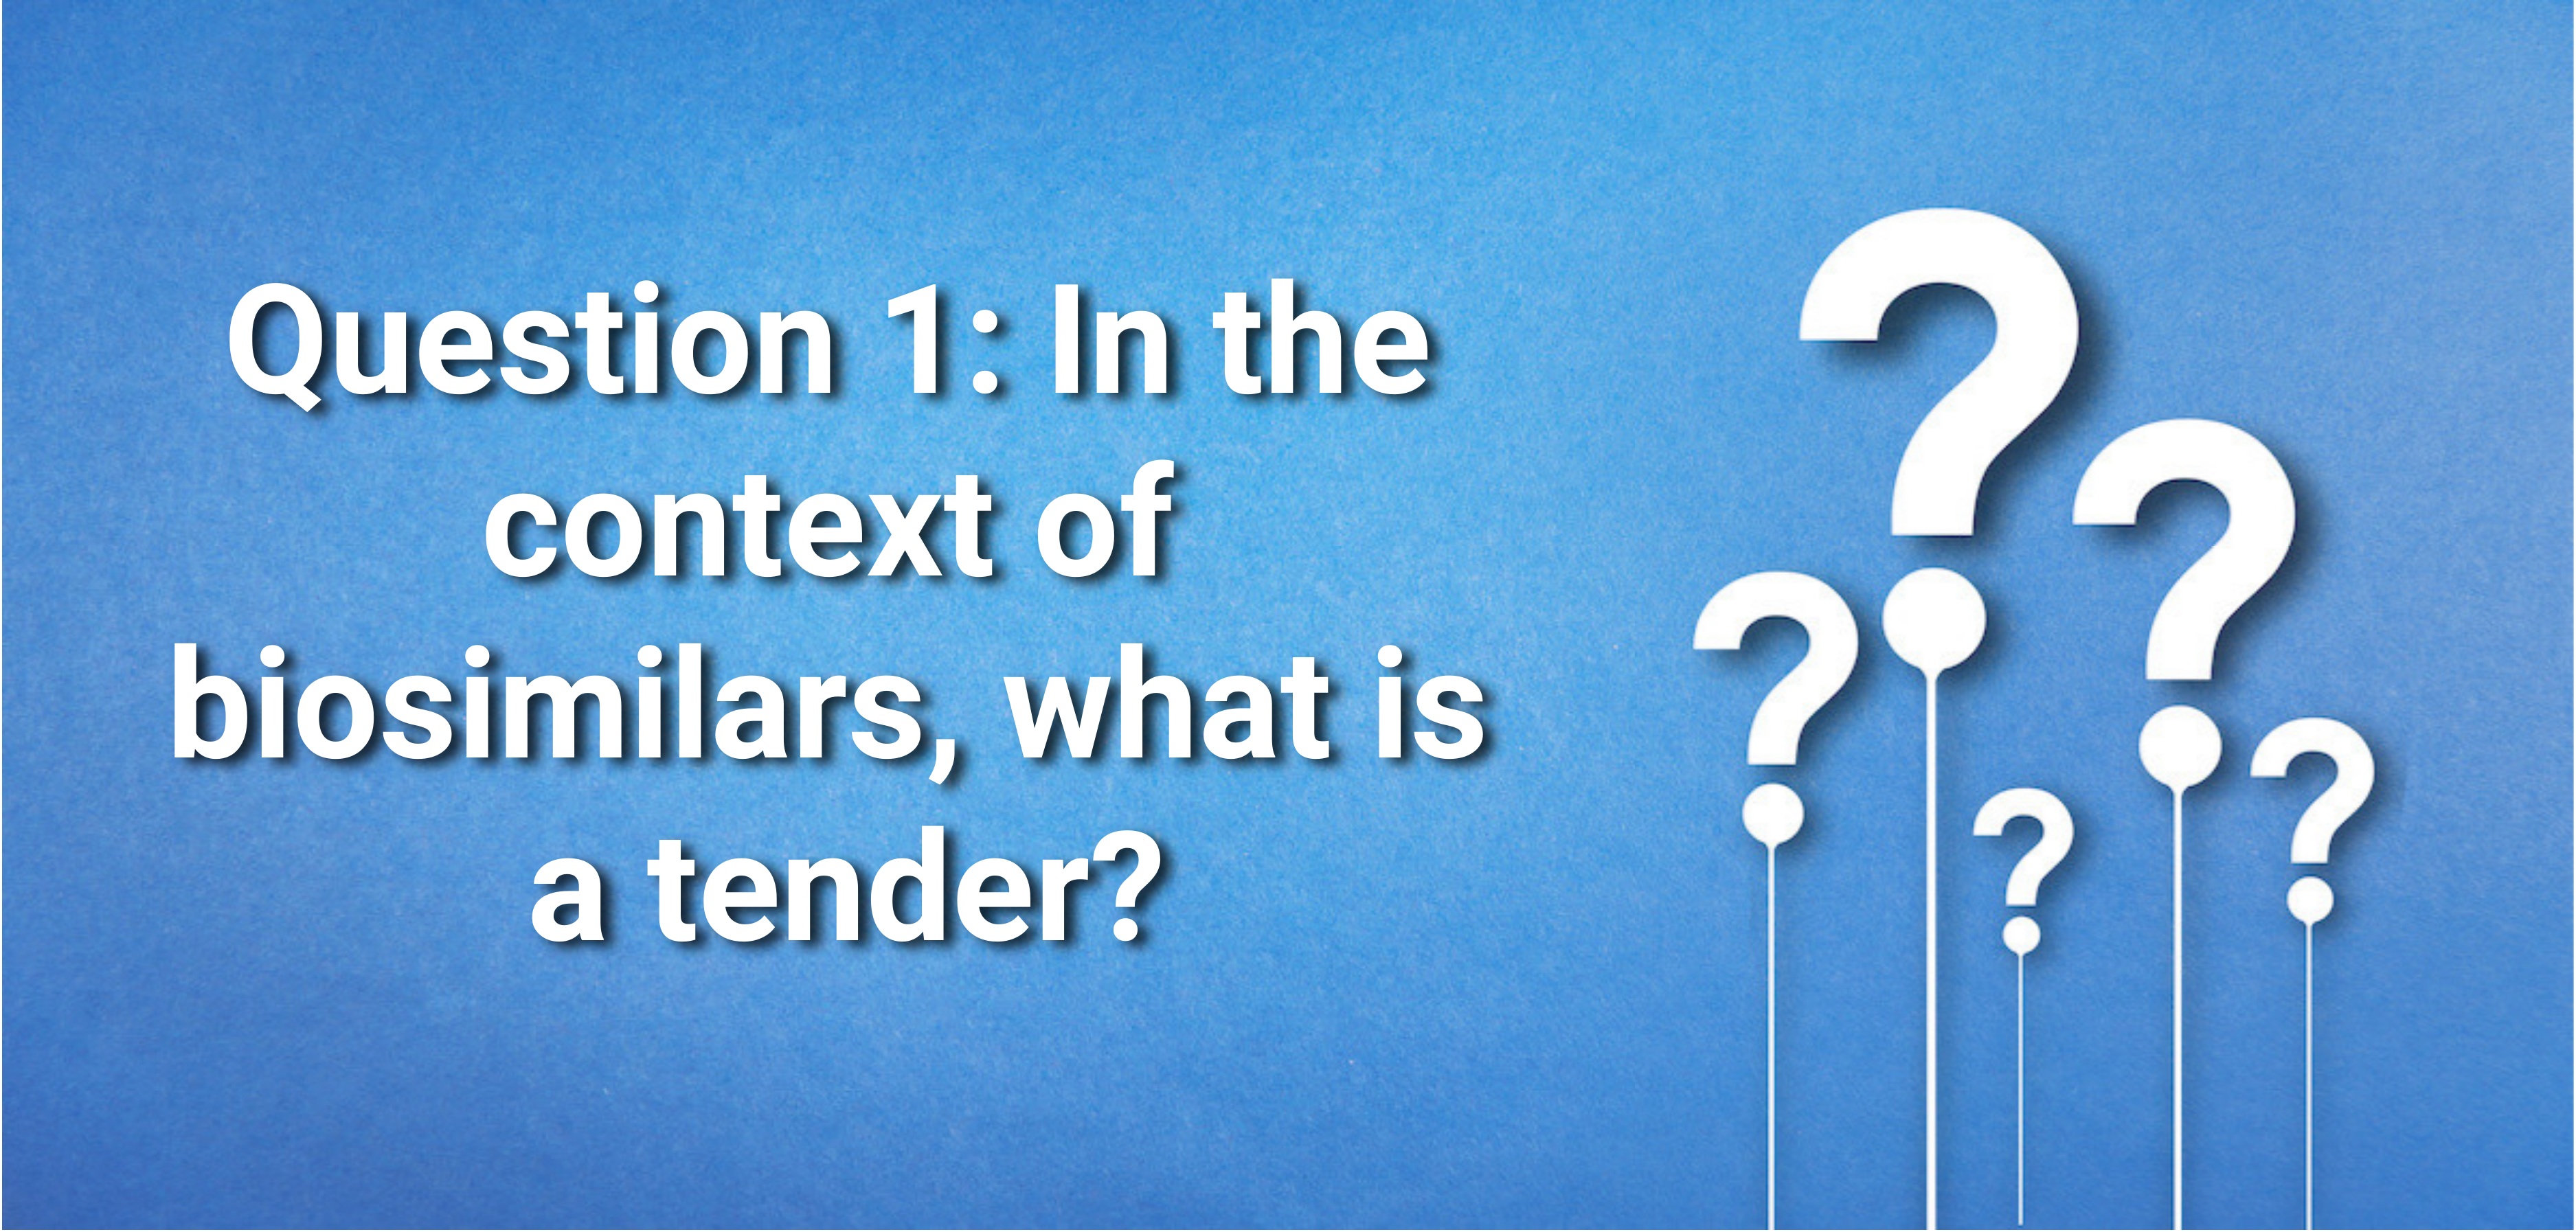 Question 1: In the context of biosimilars, what is a tender?